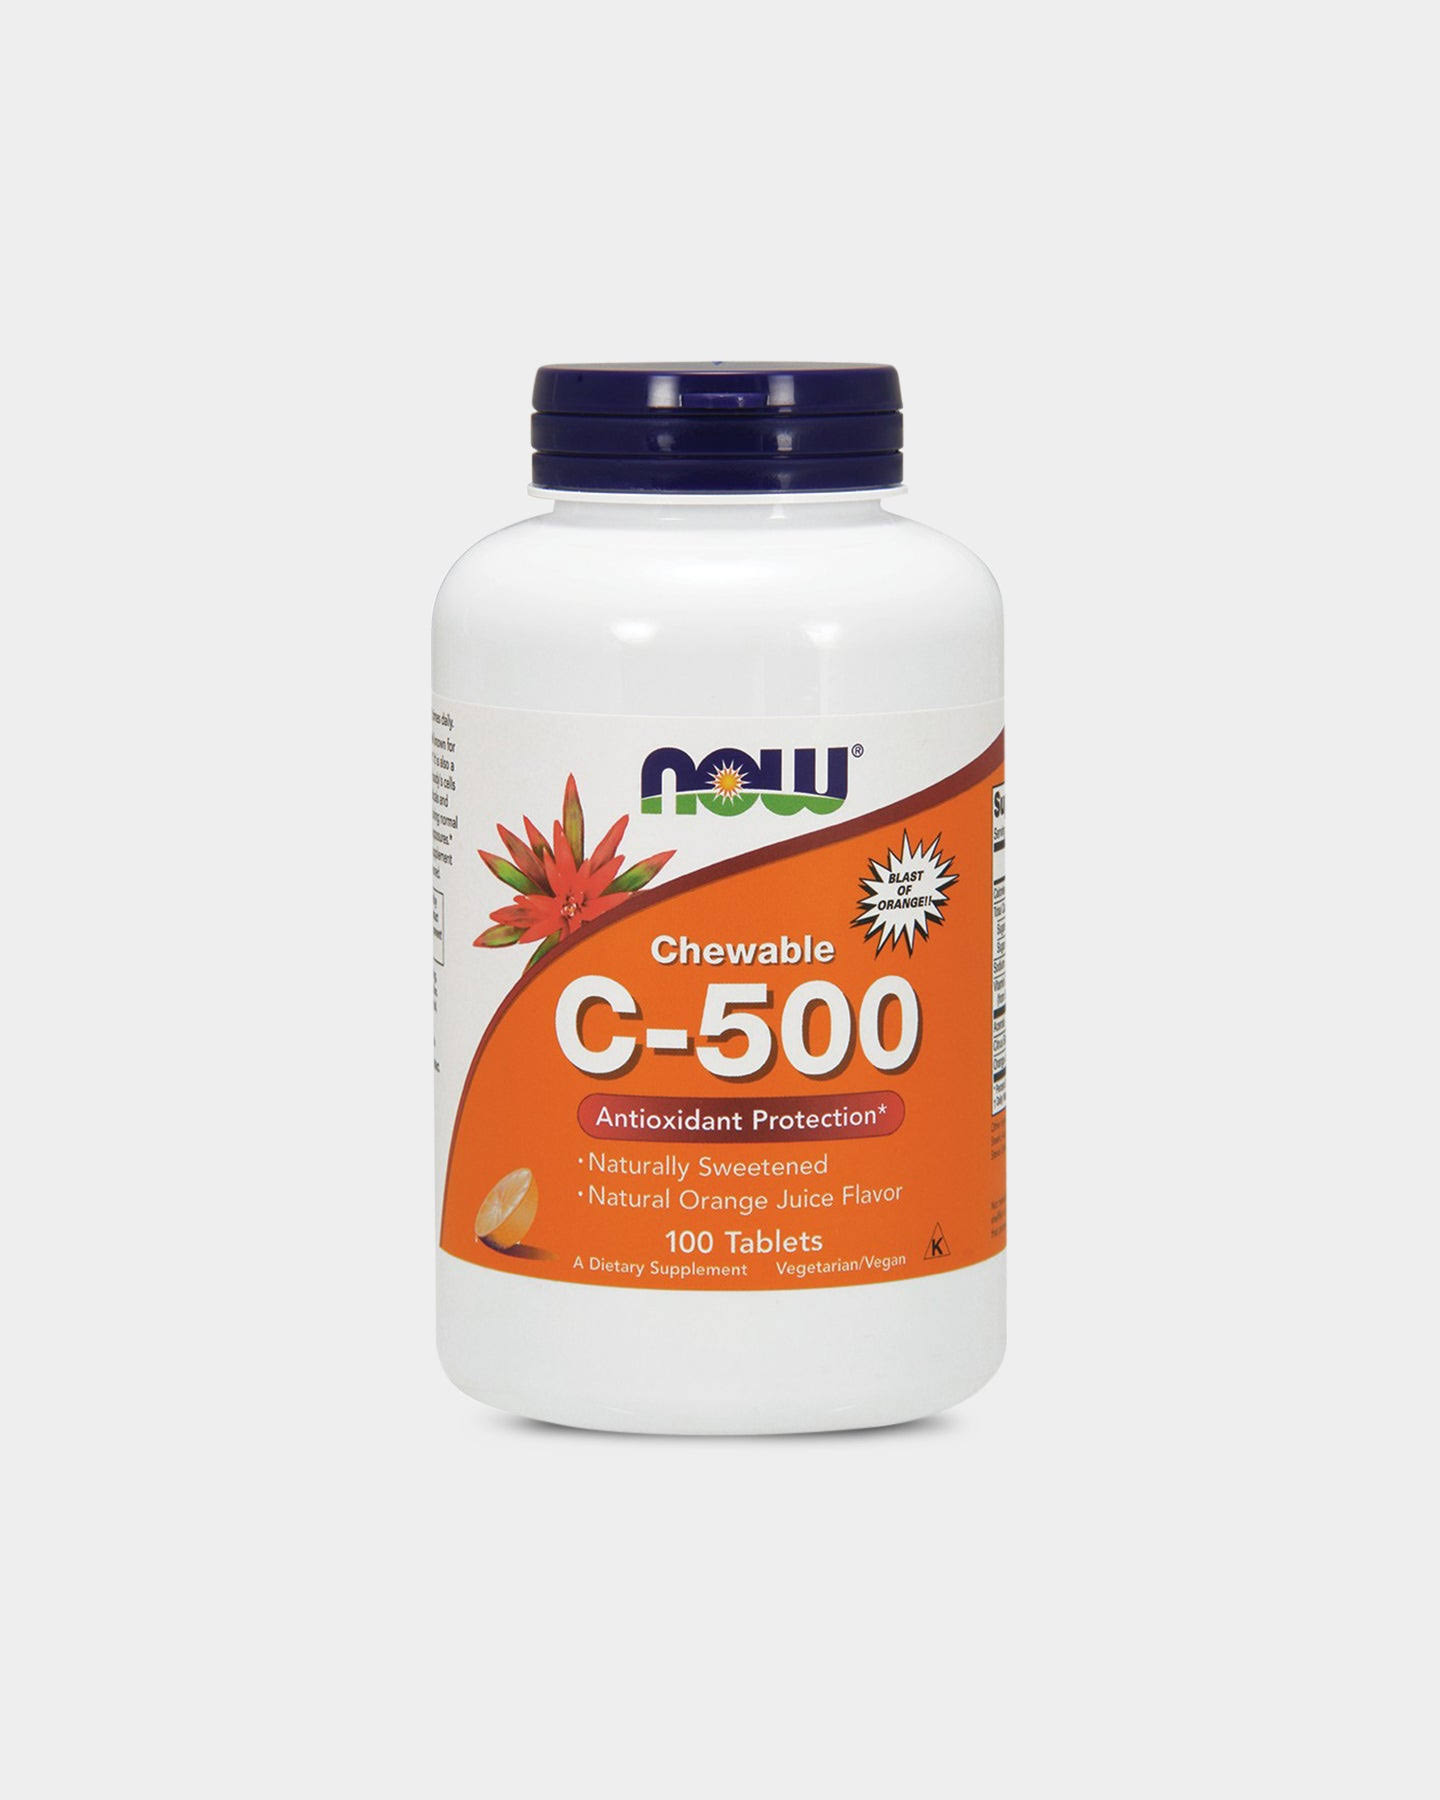 Now Foods C-500 Antioxidant Protection - Chewable Orange, 100 Tablets